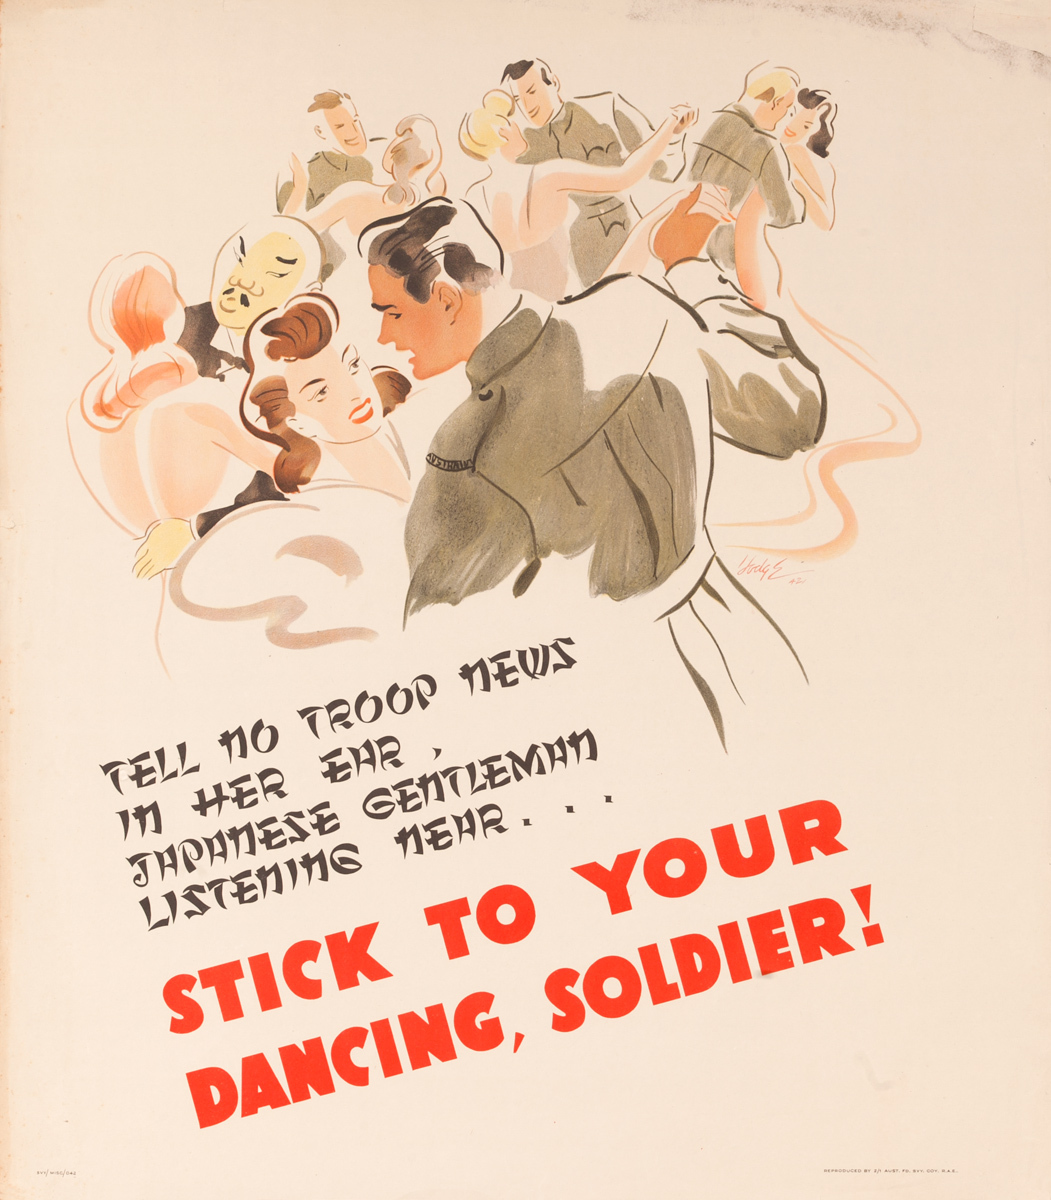 Stick to Your Dancing, Soldier, Original Australian WWII Poster